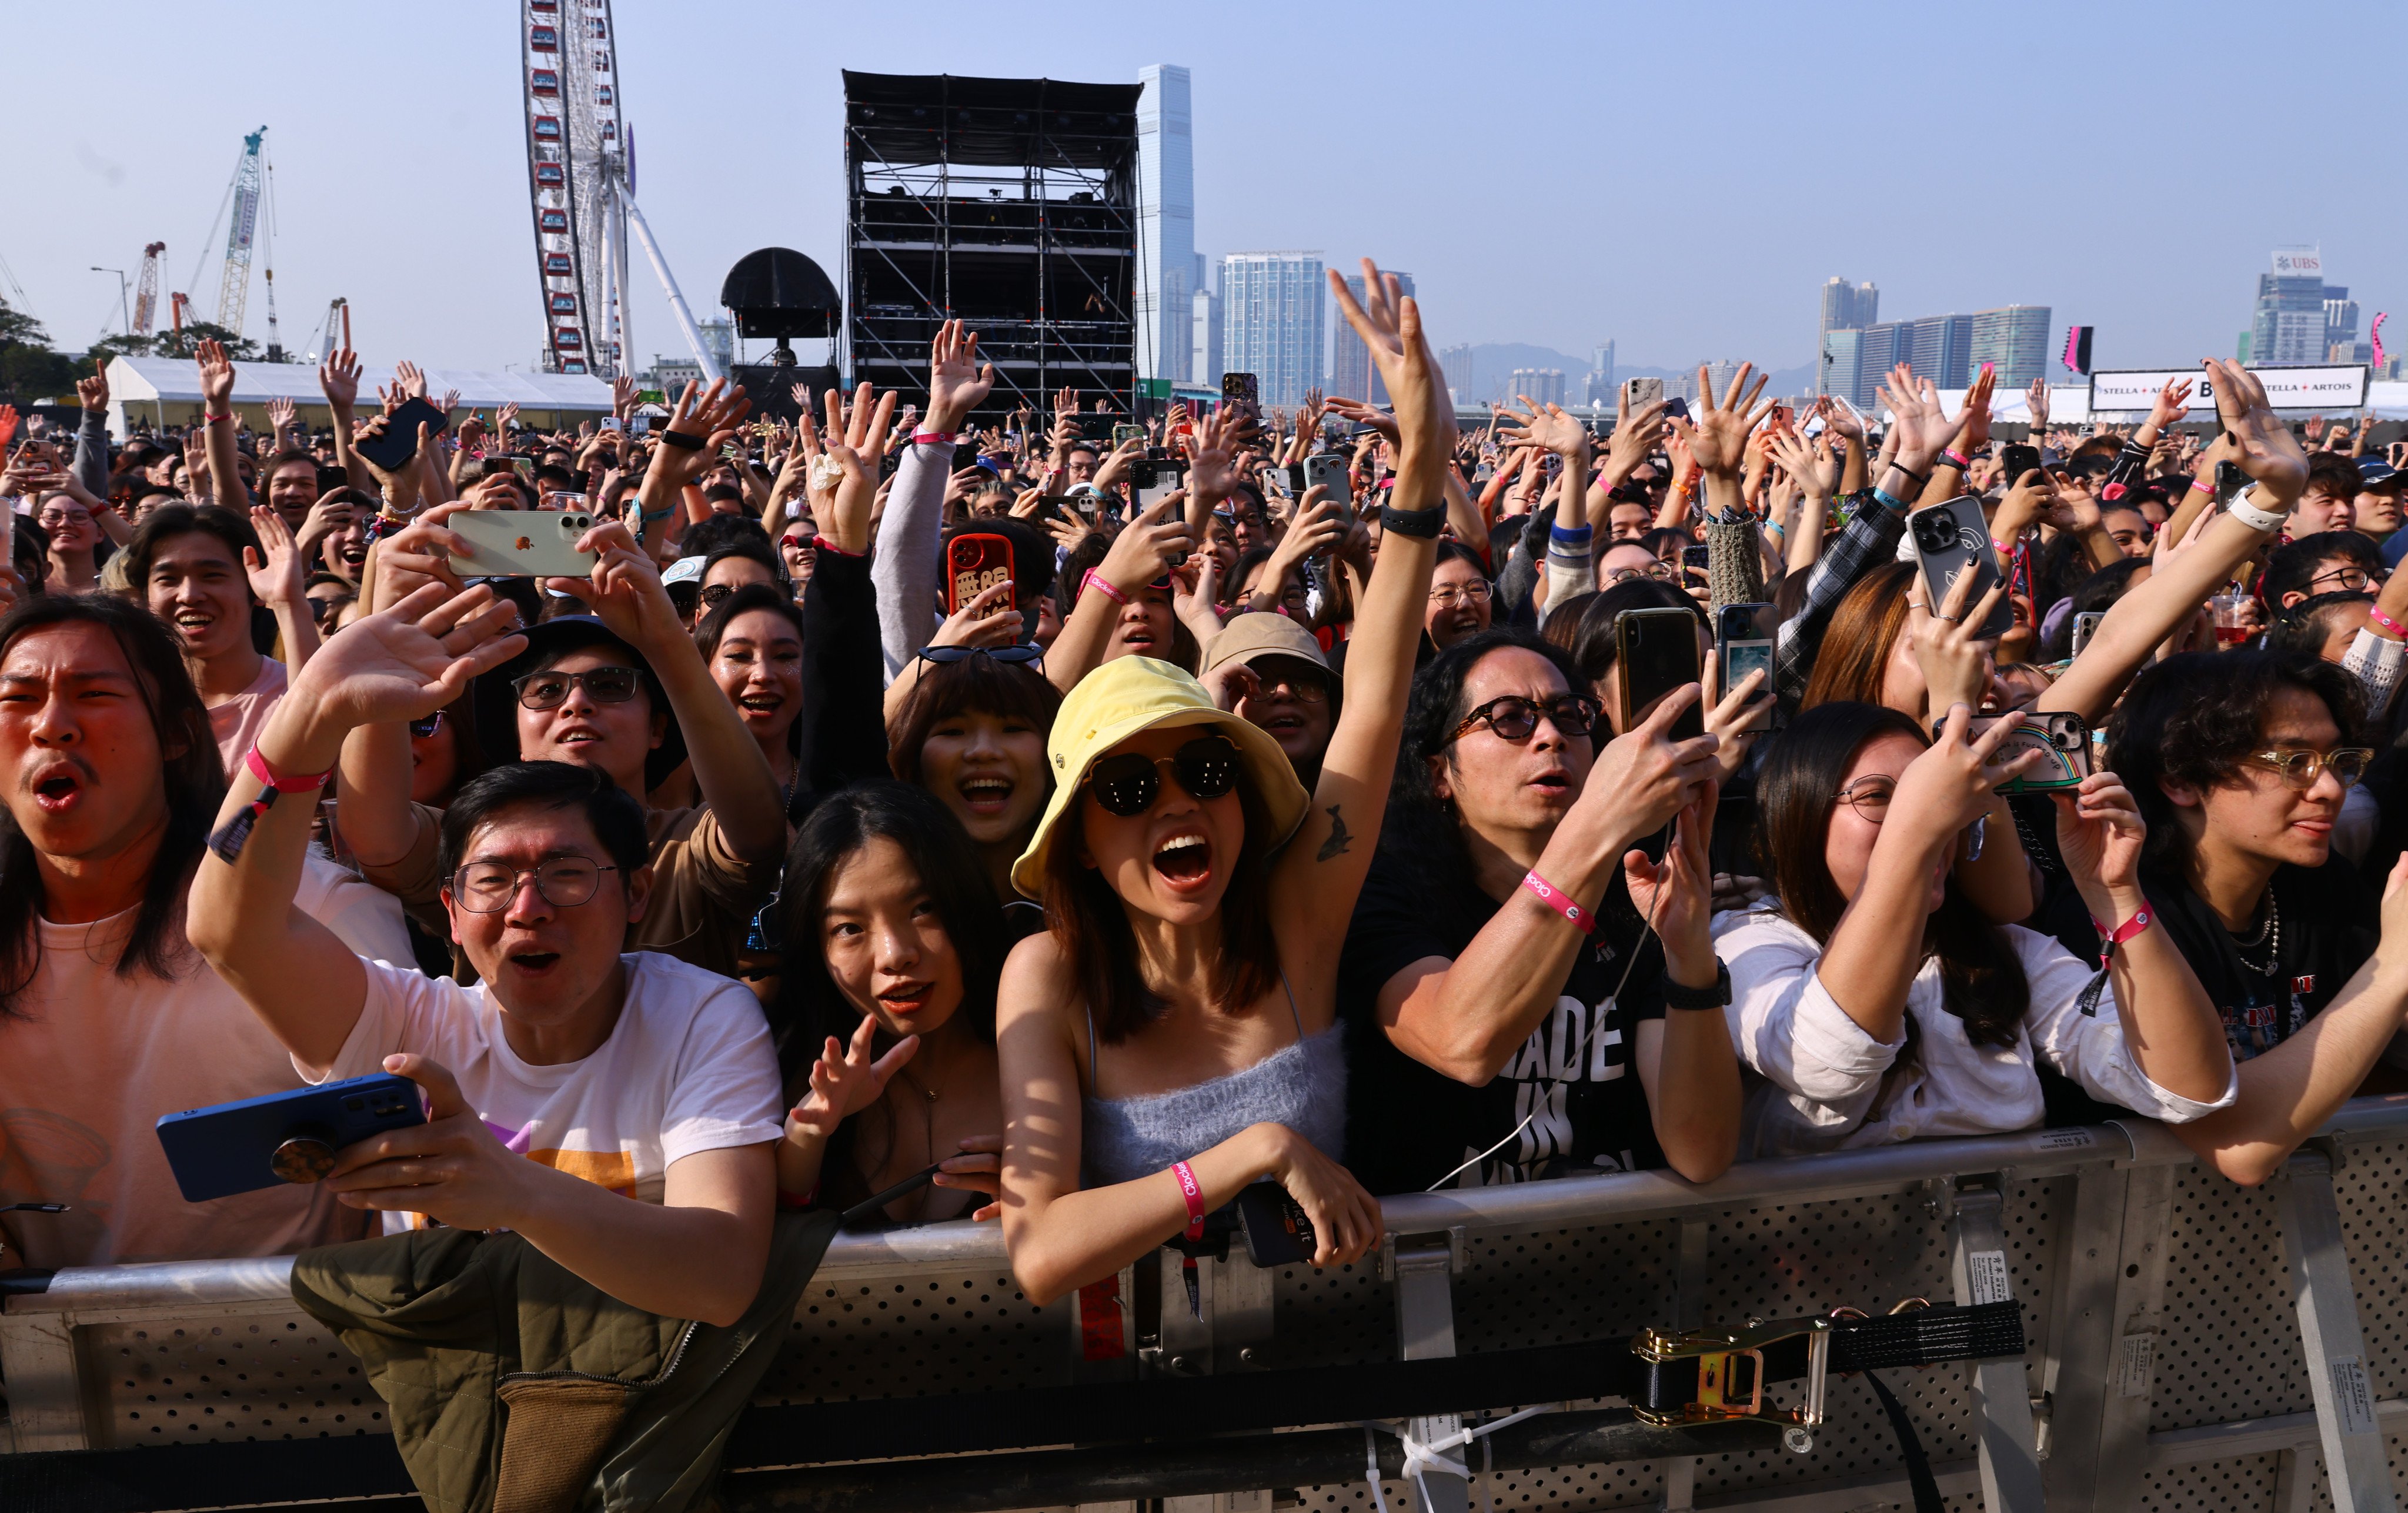 Hong Kong’s largest outdoor music festival, held at the Central Harbourfront, returned on March 3-5 after a four-year hiatus. Photo: Dickson Lee